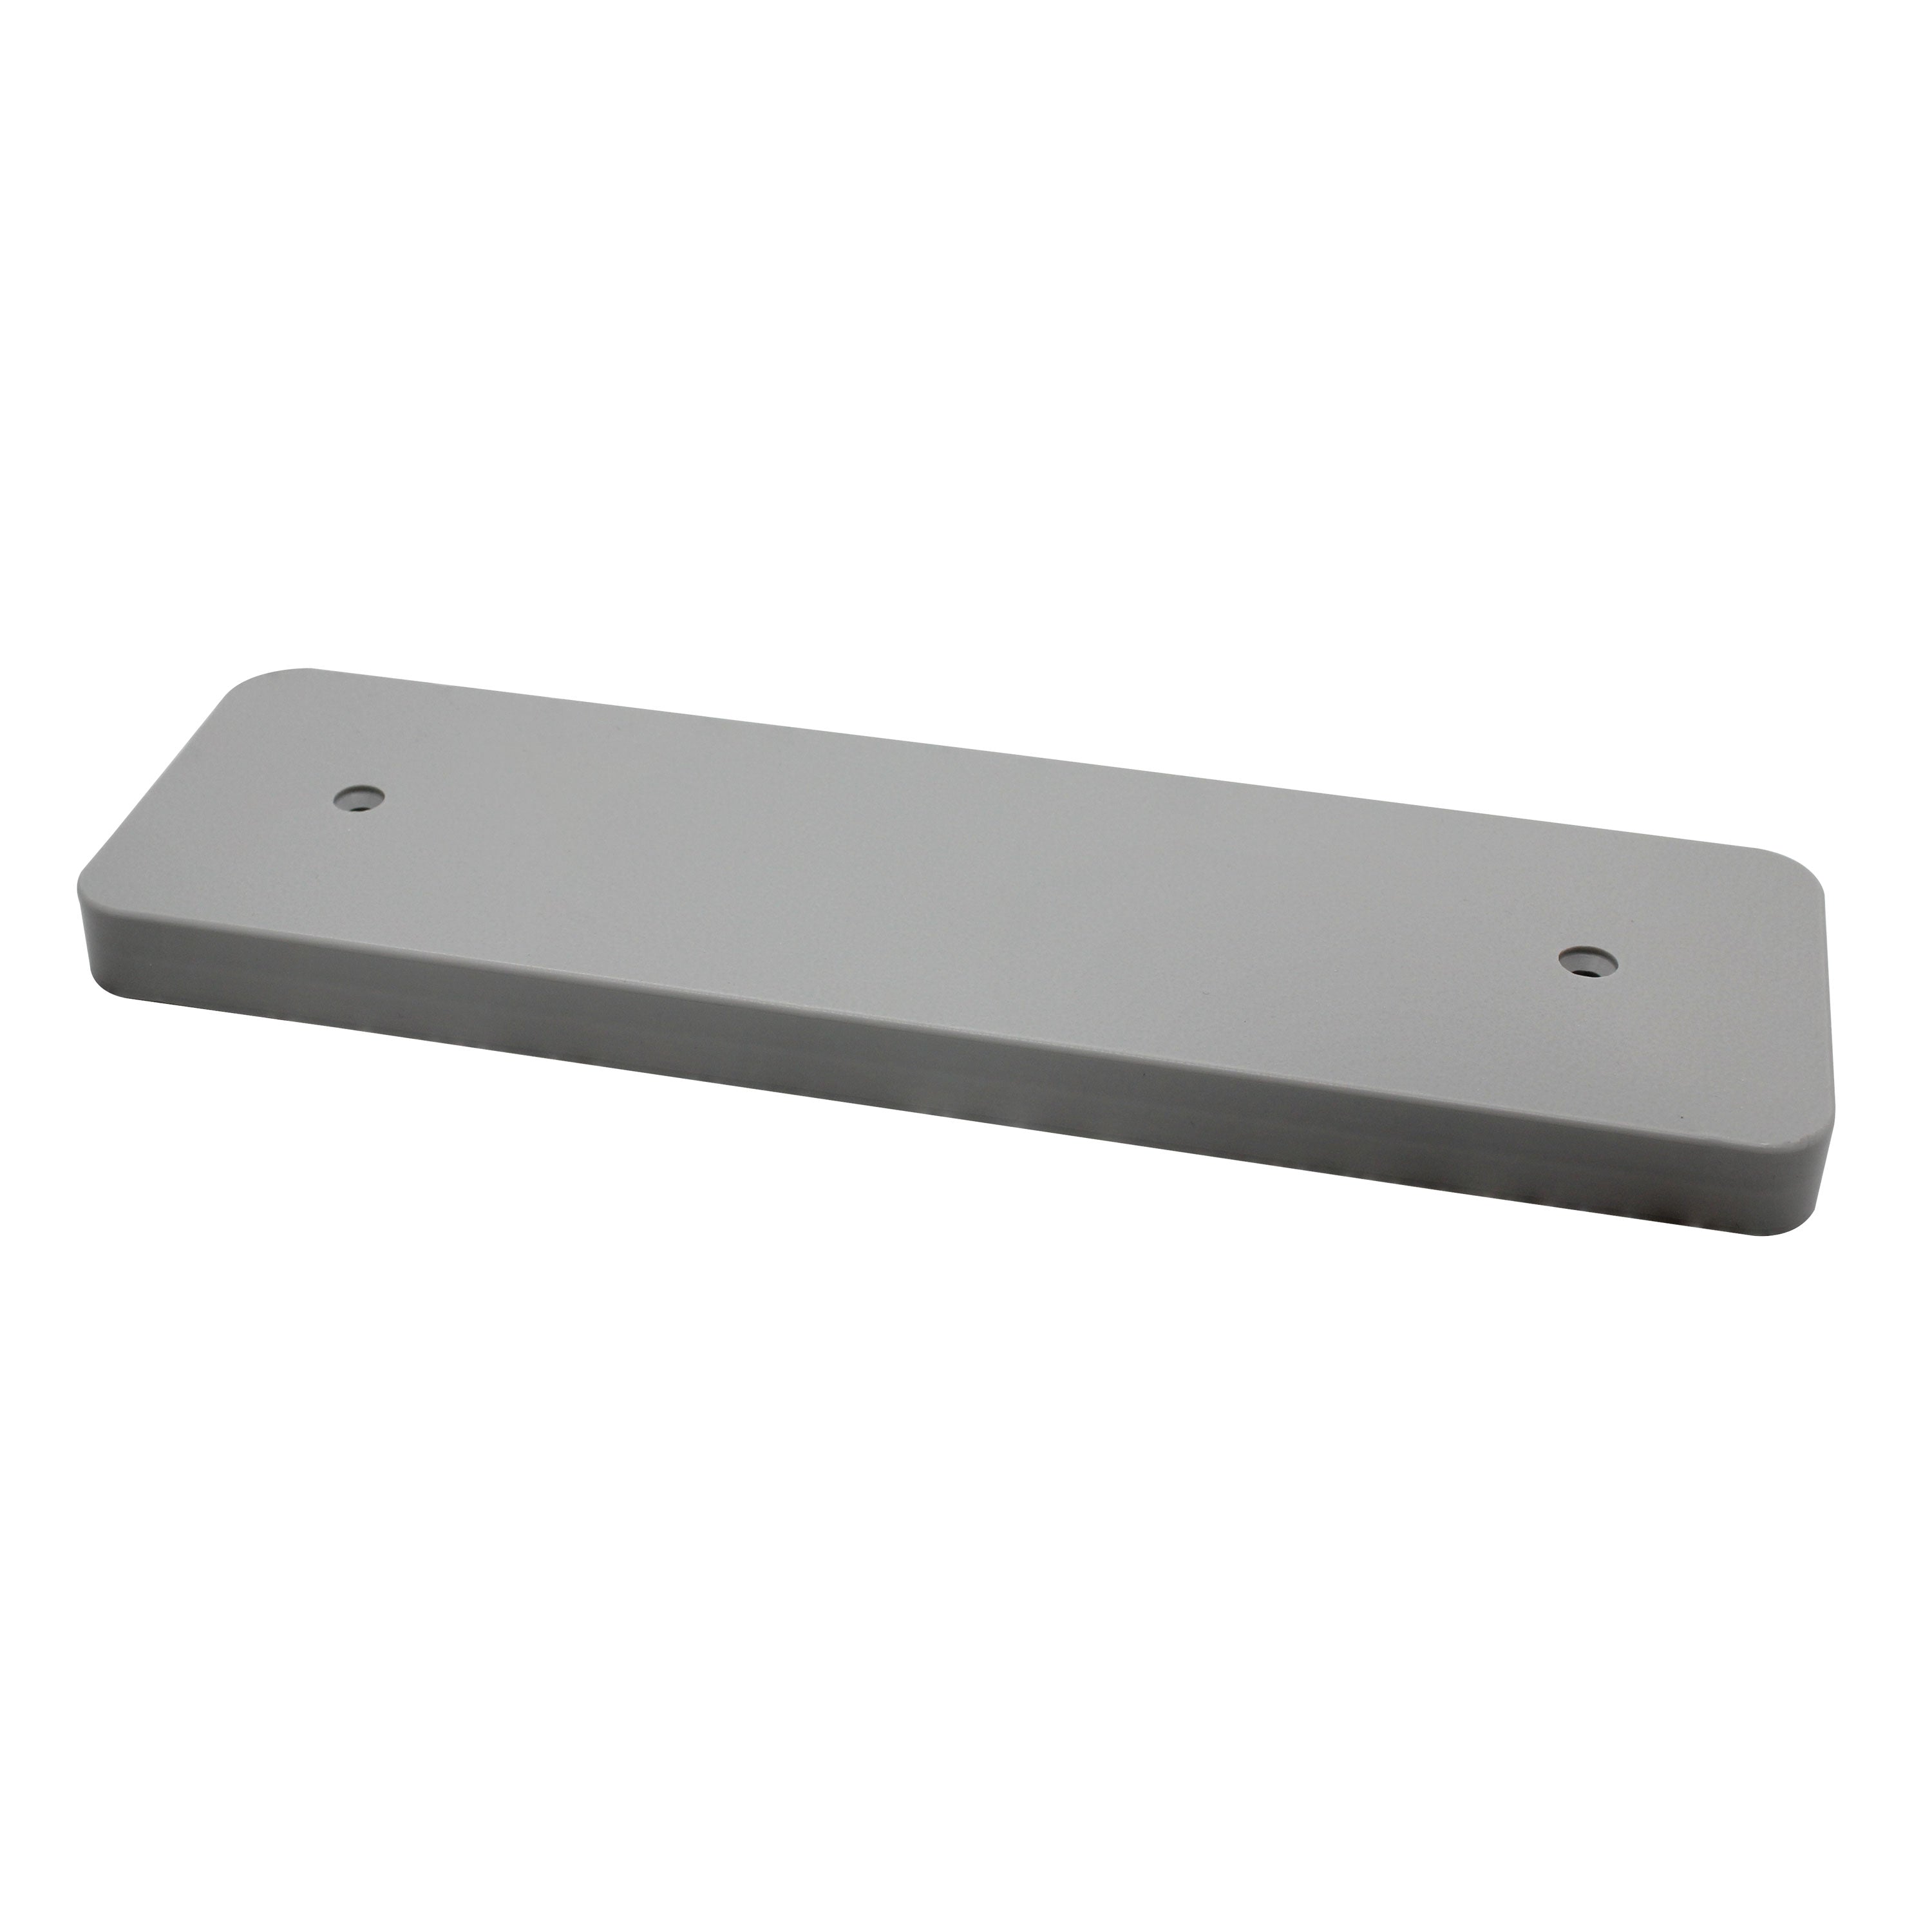 Boat Zone BRDGRY12 Transducer Plate - 12", Gray